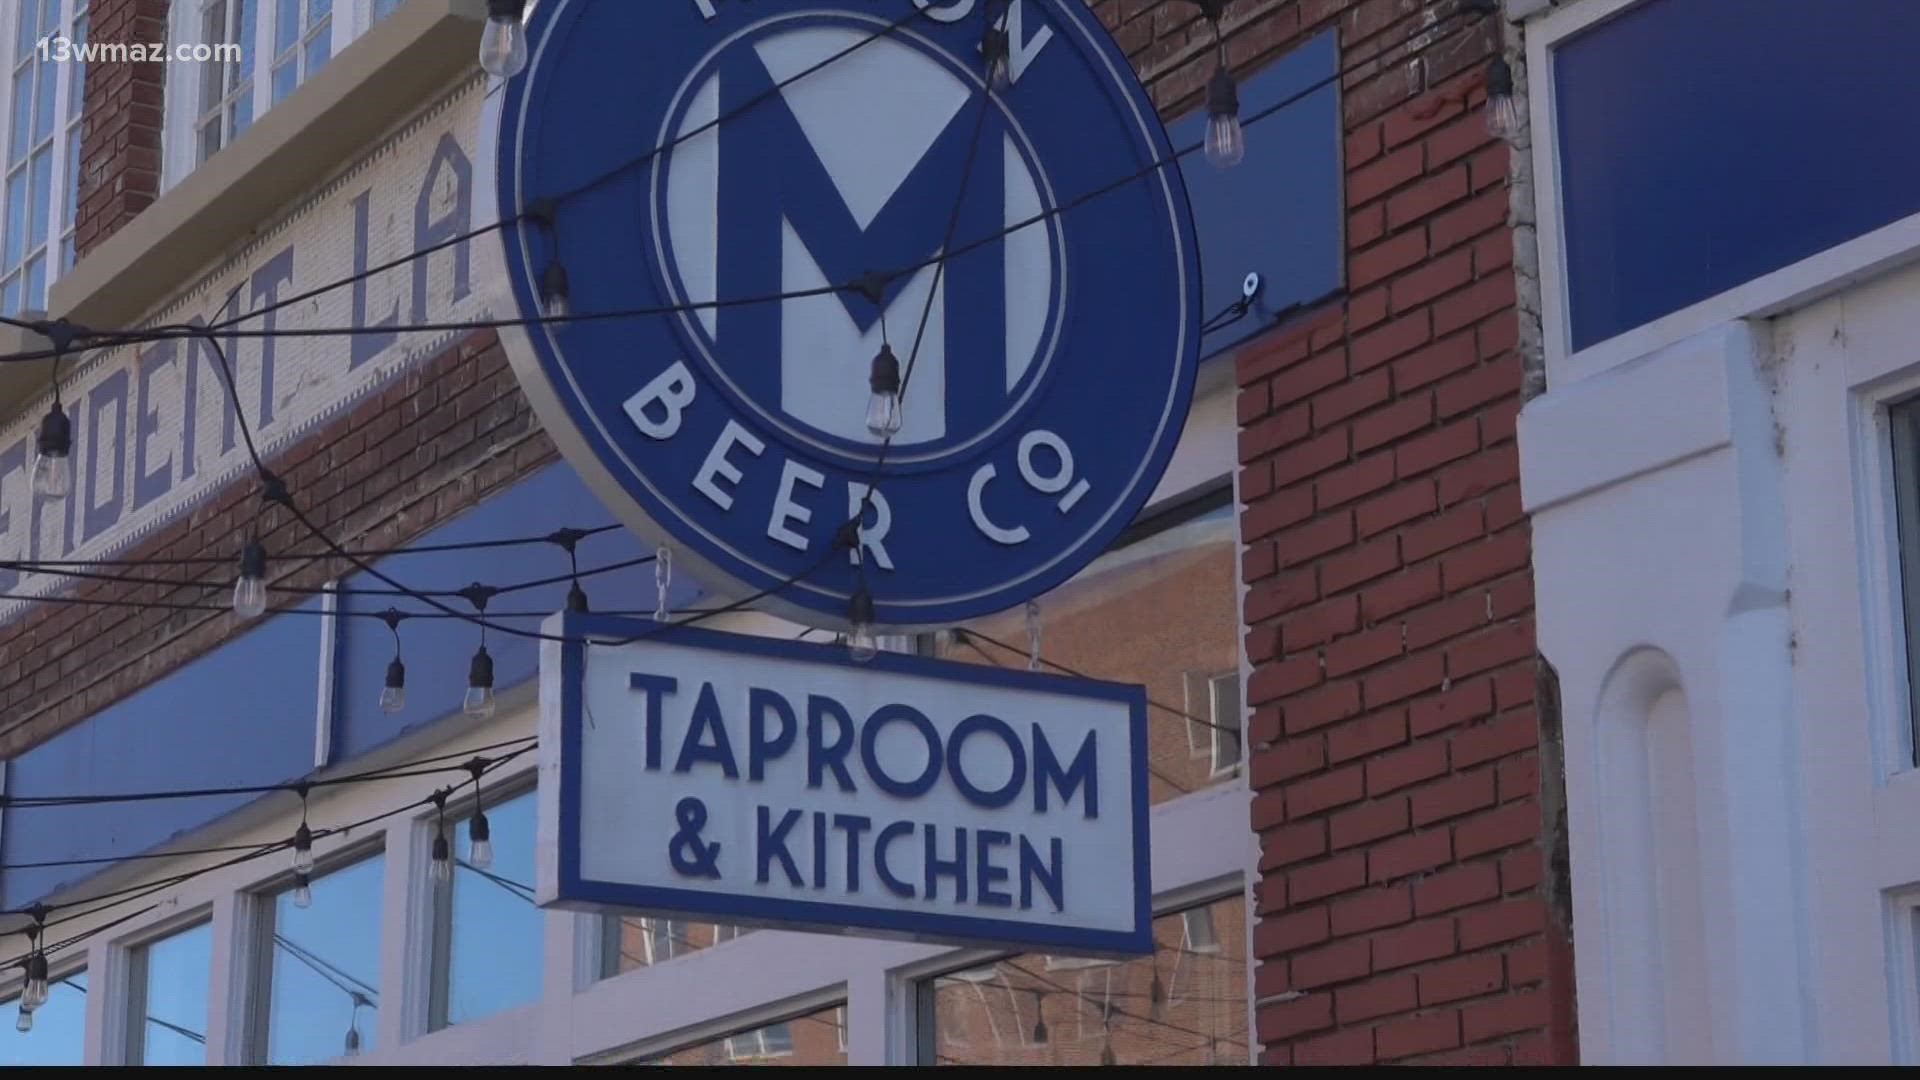 Macon Beer Company announced on Monday that its final day of operation will be Dec. 11.